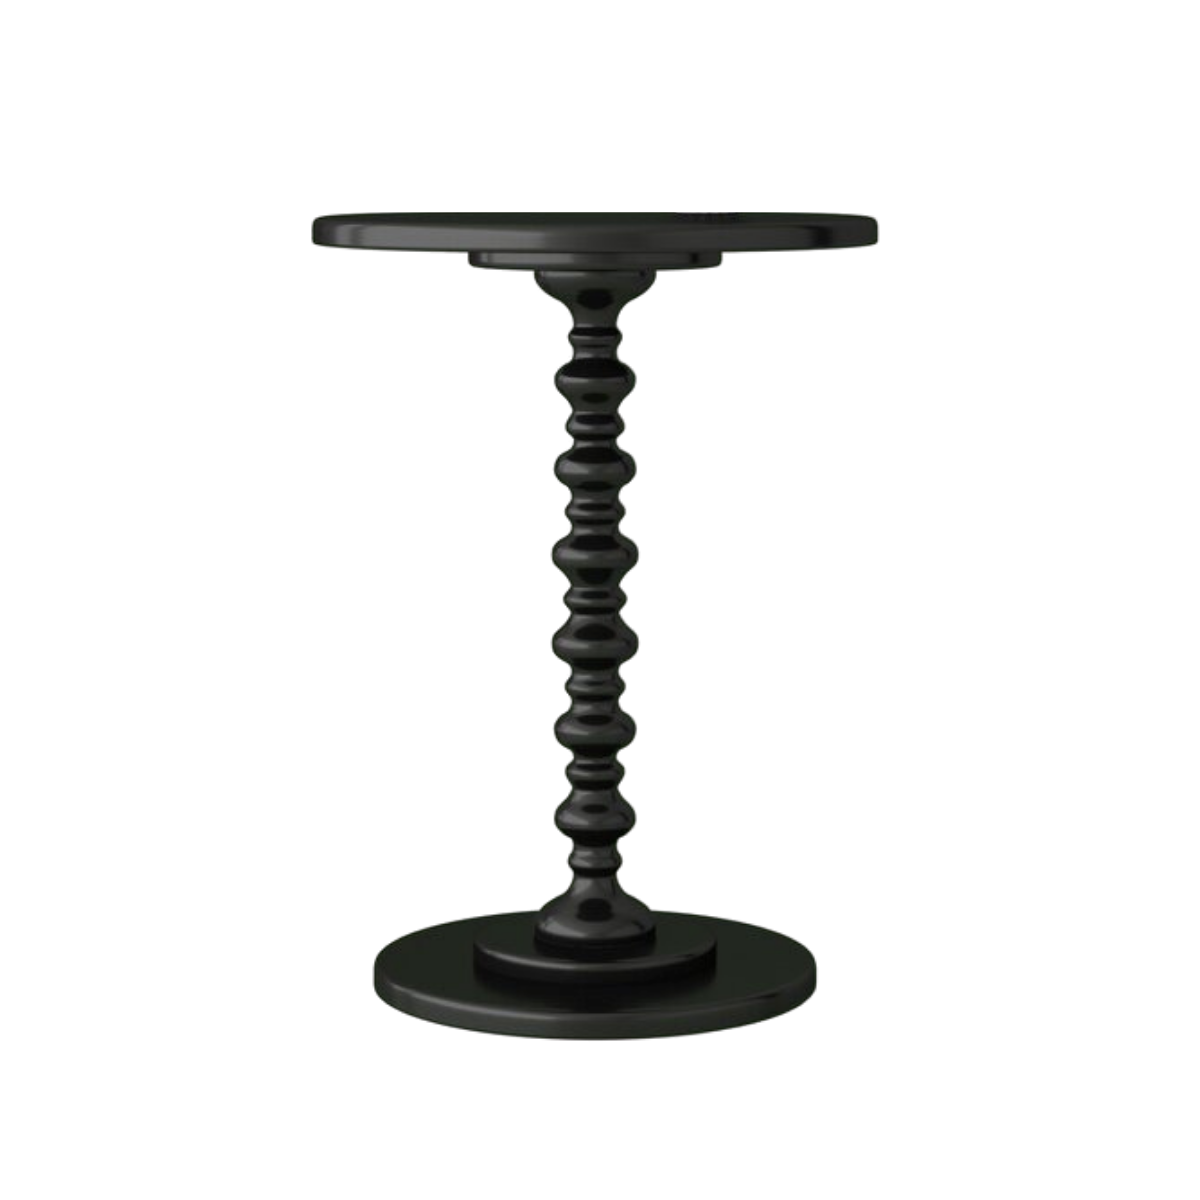 High/Low List: Modern Traditional Furniture & Decor - Black pedestal spindle side table. High end decor and their budget friendly lookalikes. | Nadine Stay